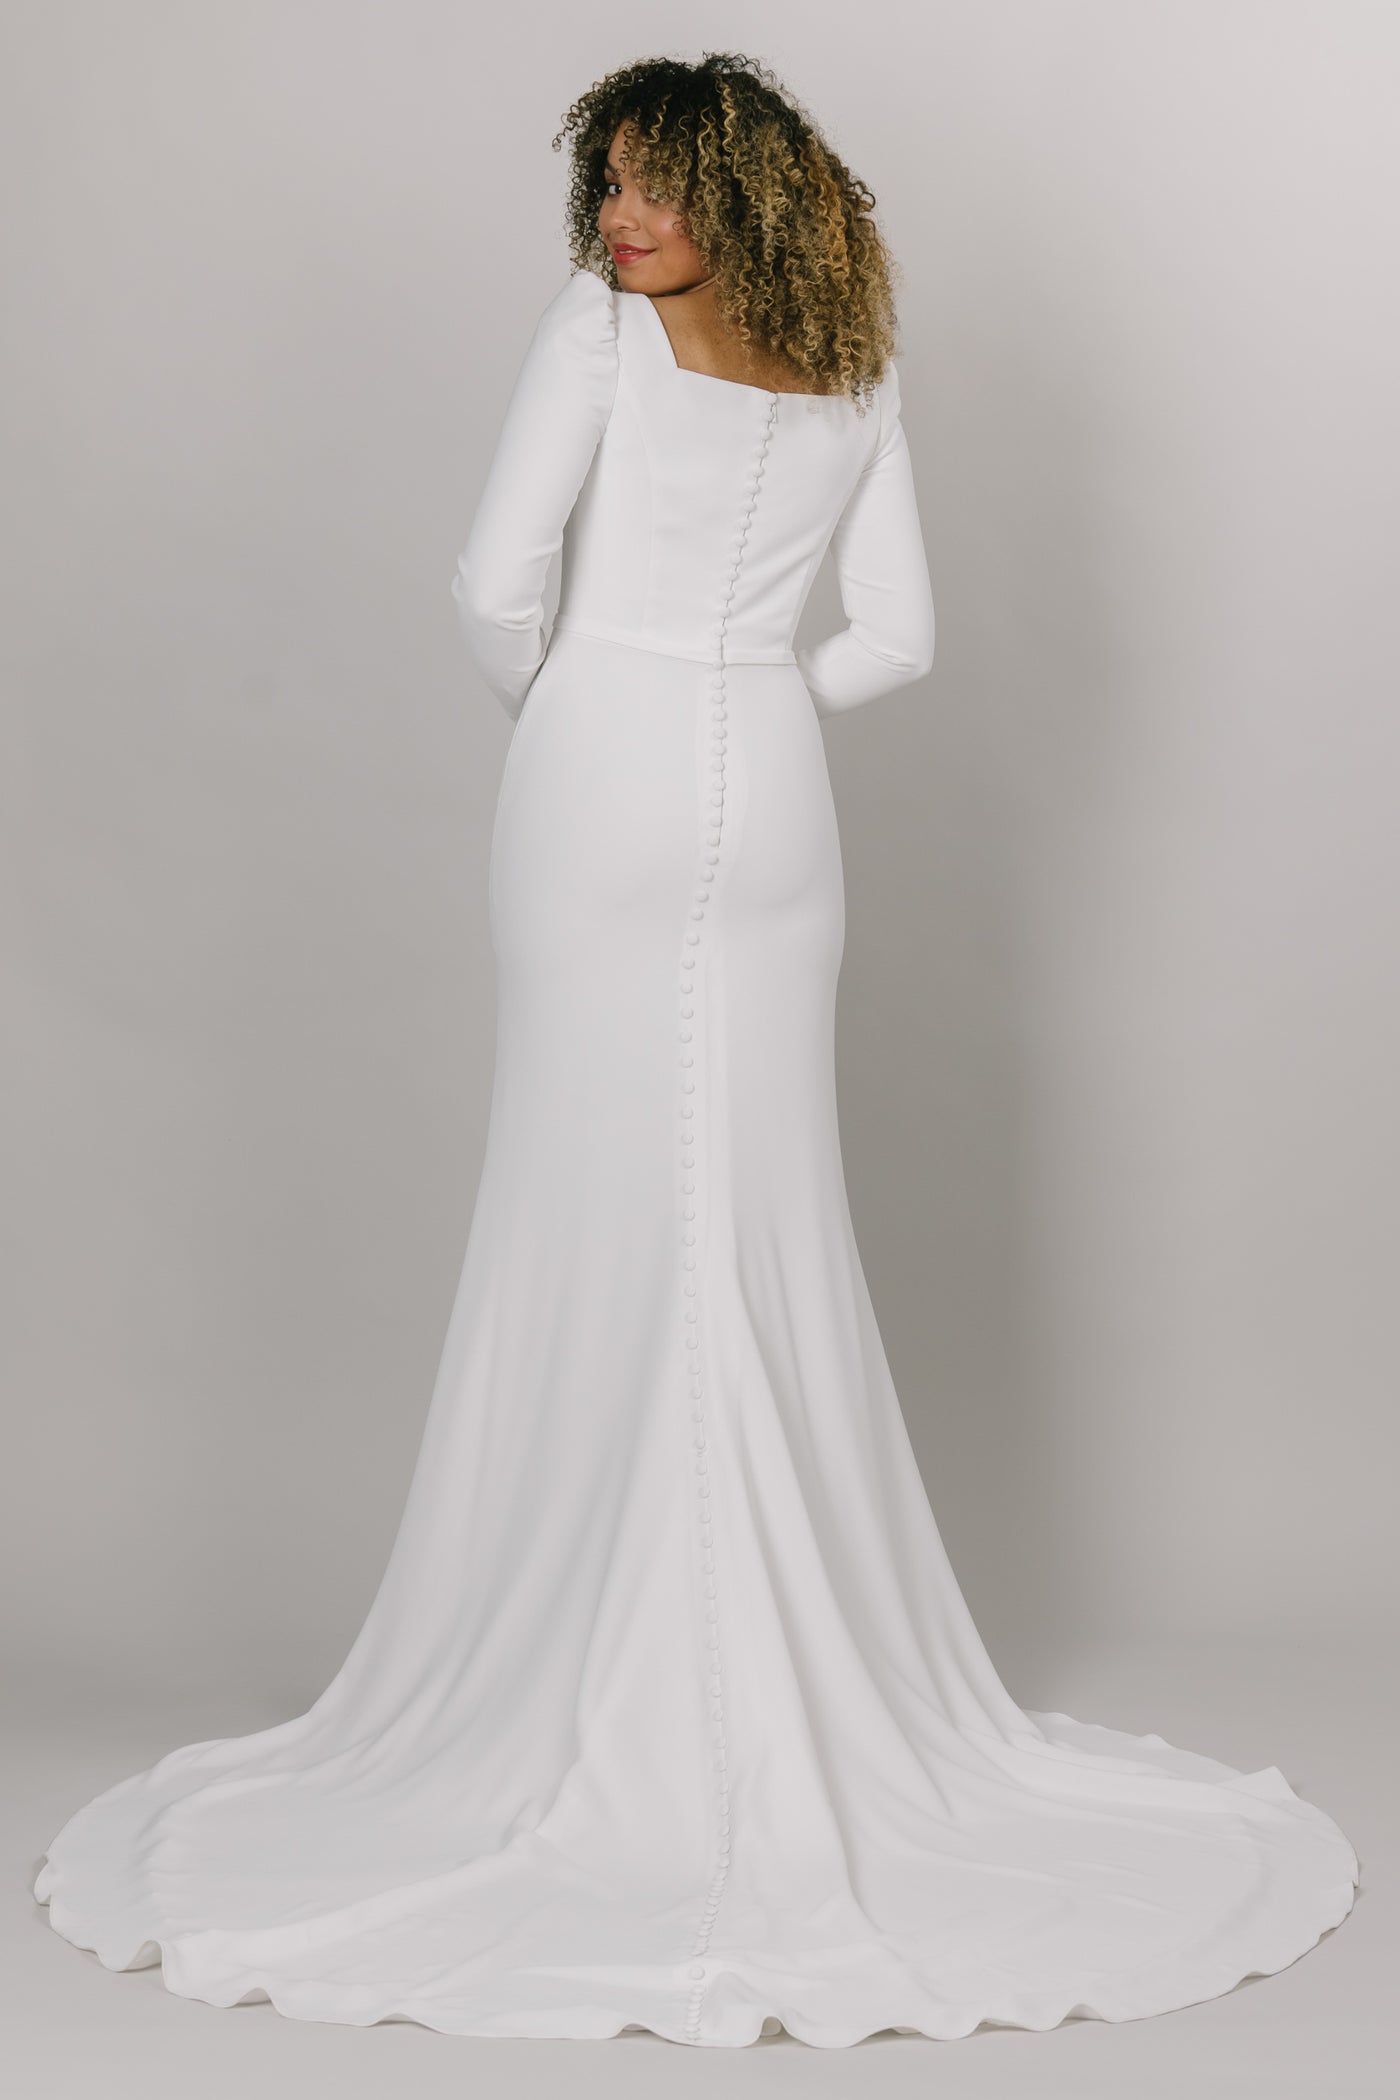 Back view of modest wedding dress with long puffed sleeves. This dress is fitted with a knee high slit and a square neck line. 